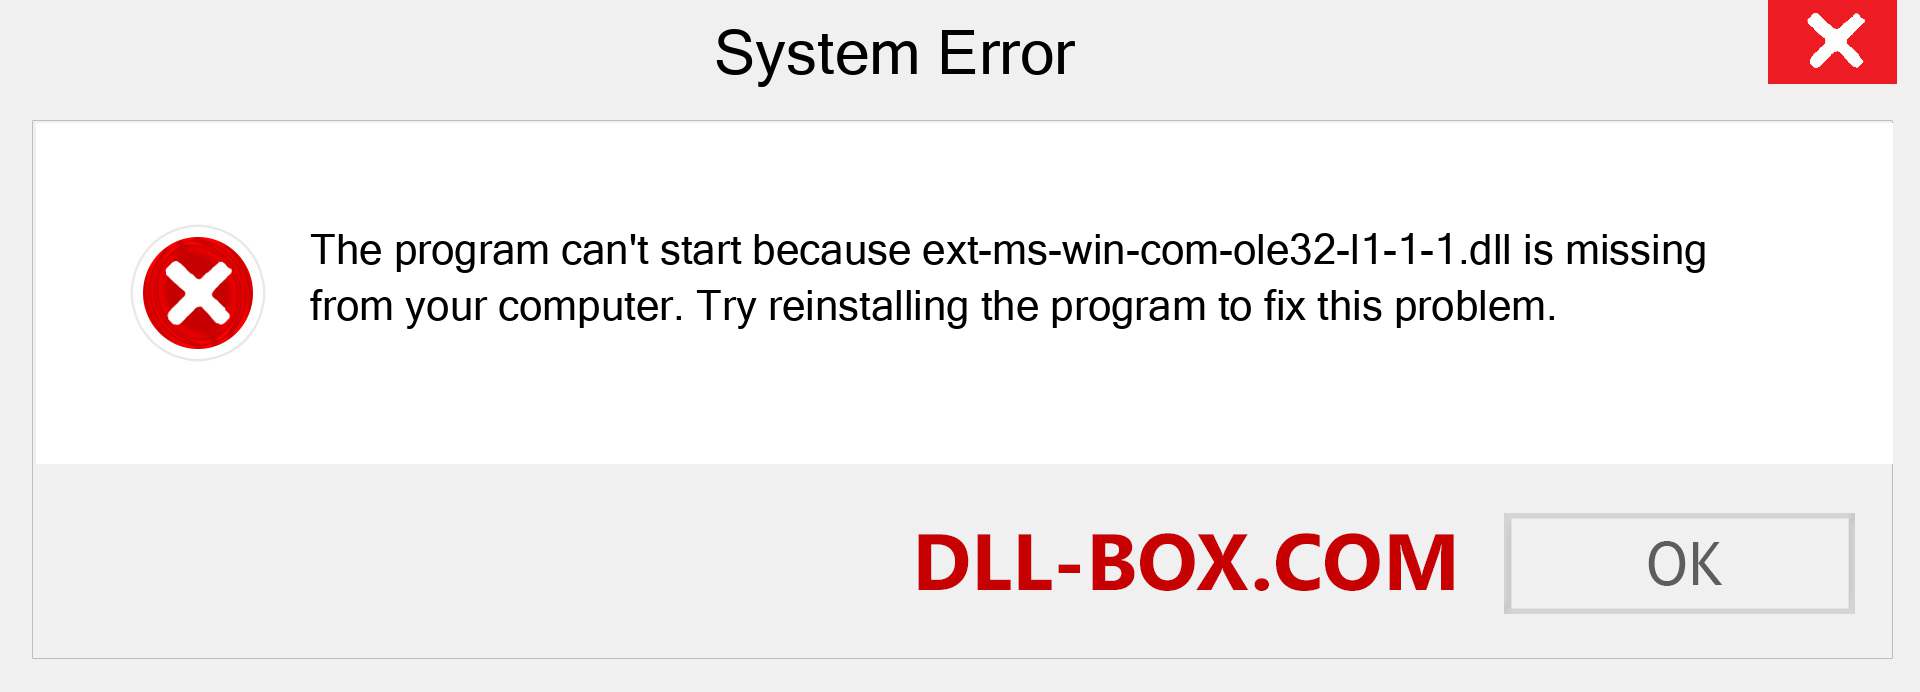  ext-ms-win-com-ole32-l1-1-1.dll file is missing?. Download for Windows 7, 8, 10 - Fix  ext-ms-win-com-ole32-l1-1-1 dll Missing Error on Windows, photos, images